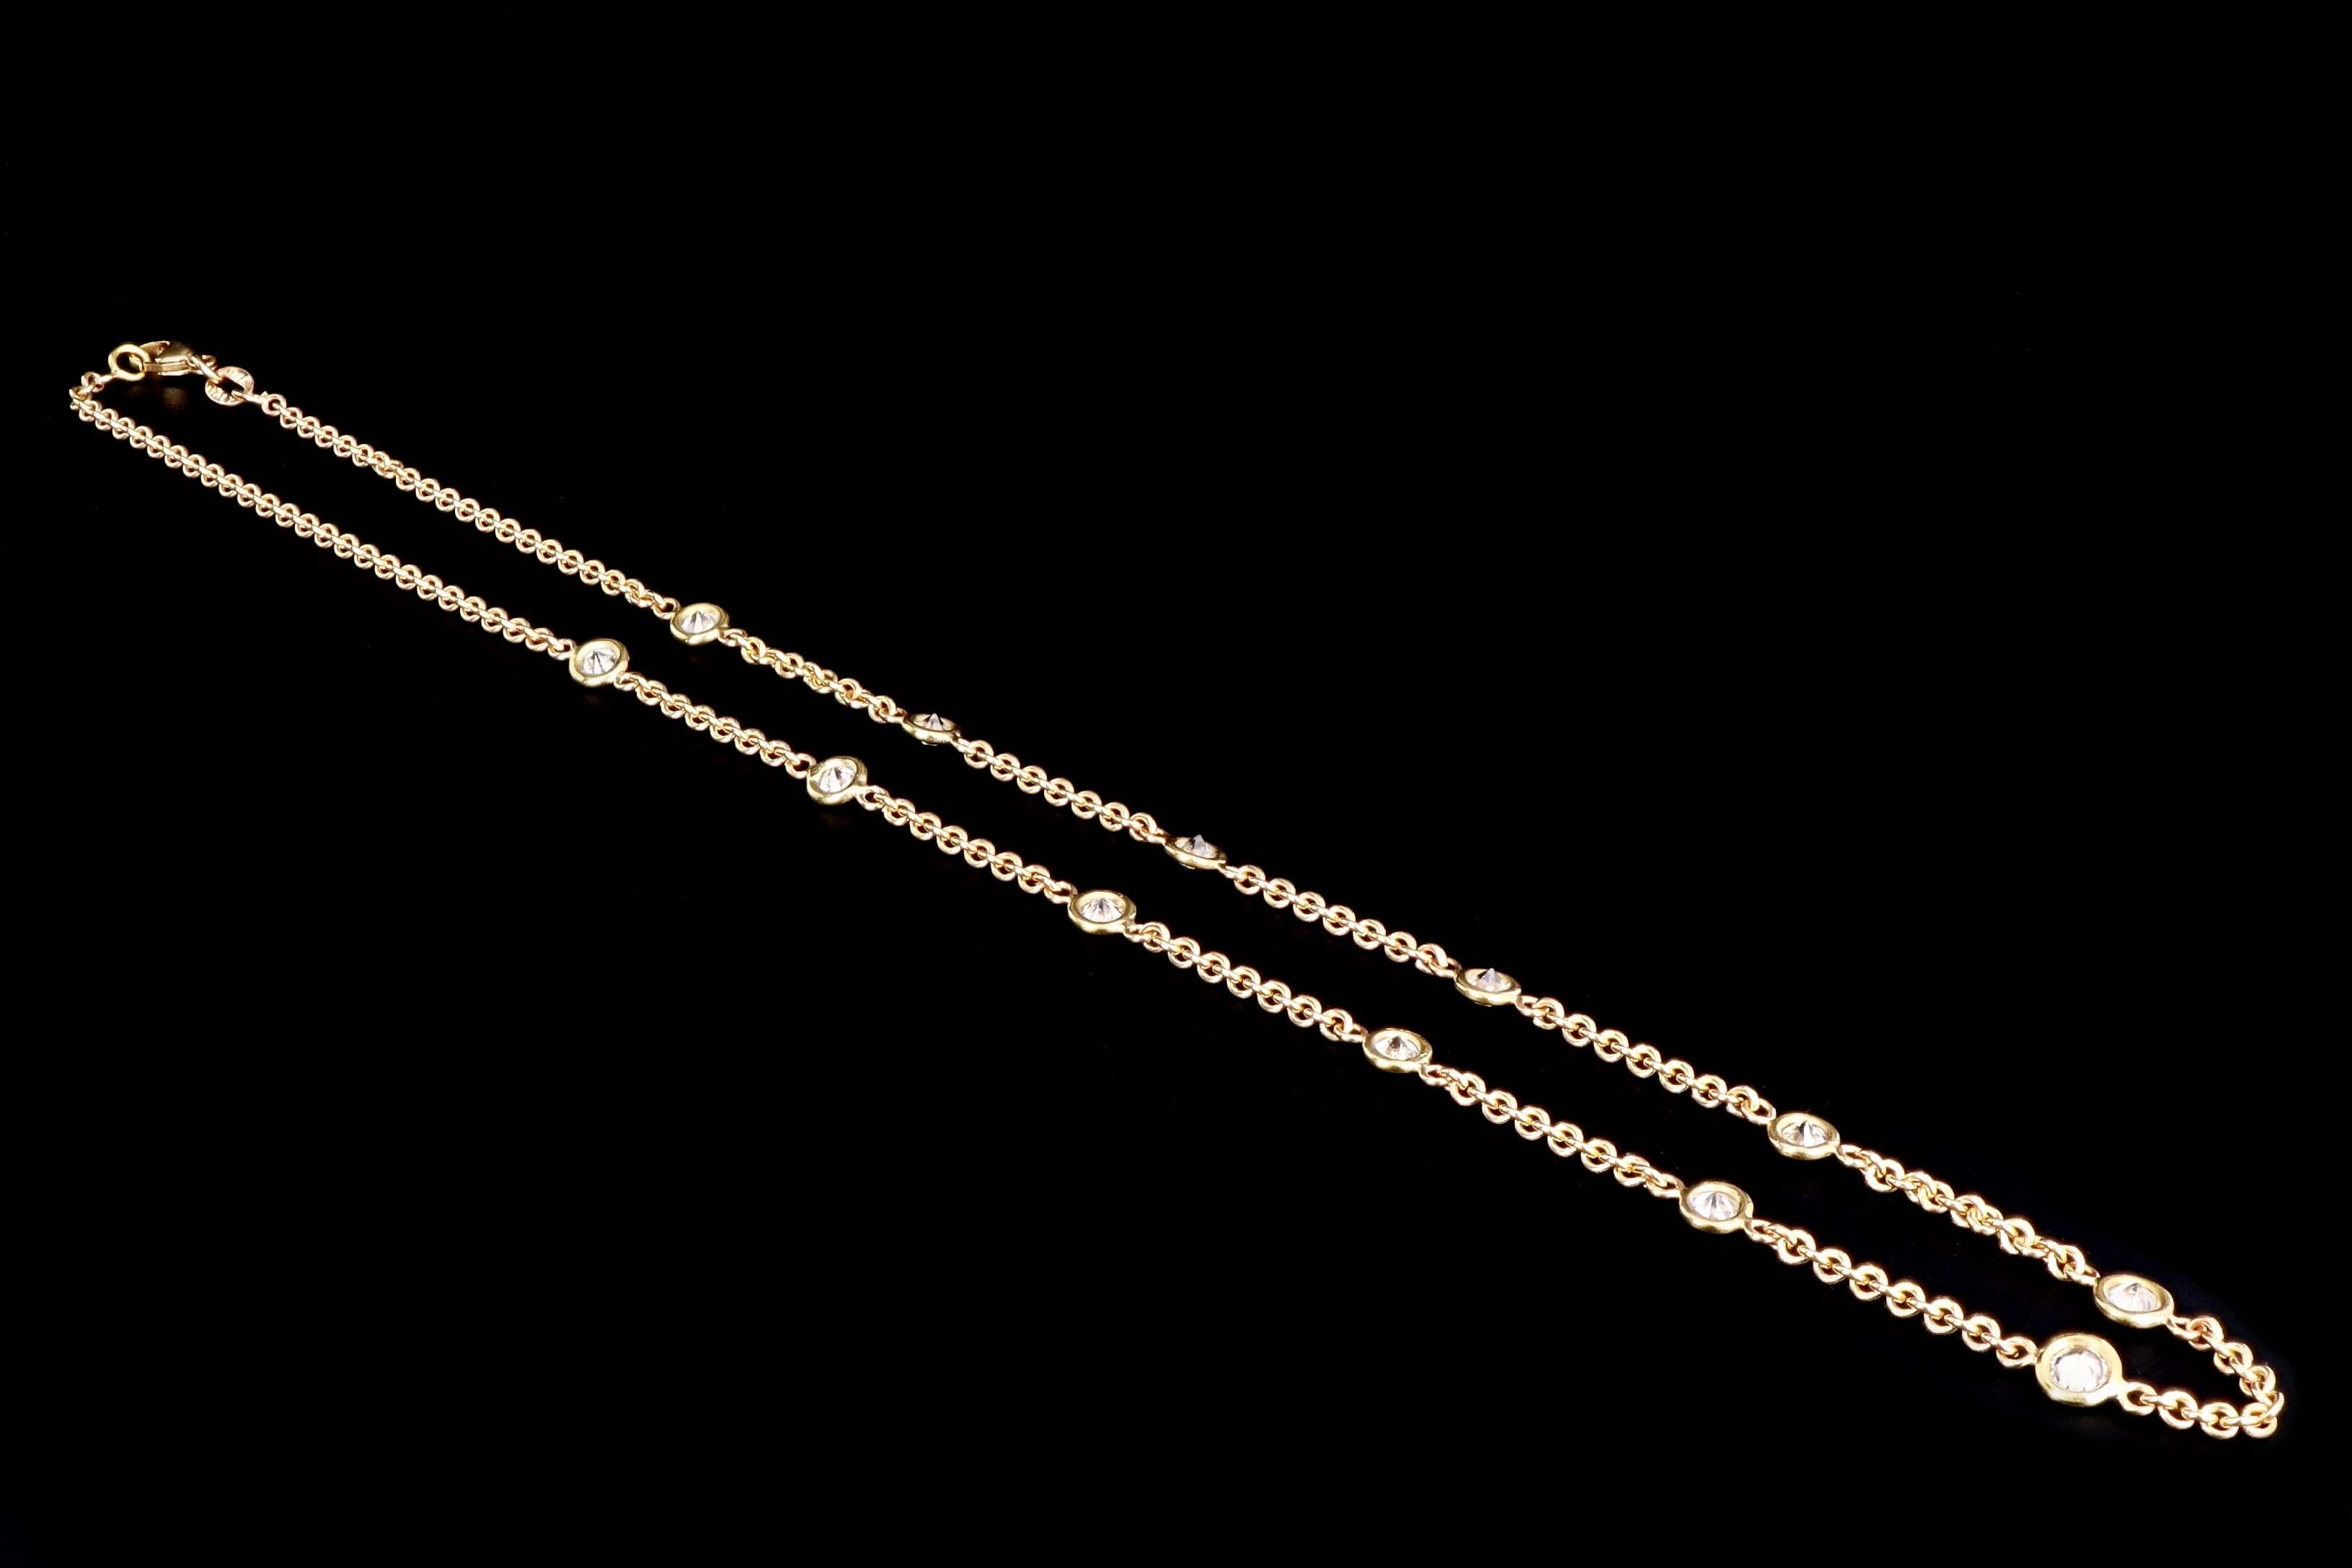 Era: Modern

Composition: 14K Yellow Gold

Primary Stone: 12 Round Brilliant Diamonds

Total Carat Weight: Approximately 1.8 Carats

Color/Clarity: G-H / SI1-2

Necklace Length: 17 Inches

Necklace Weight: 8.2 Grams